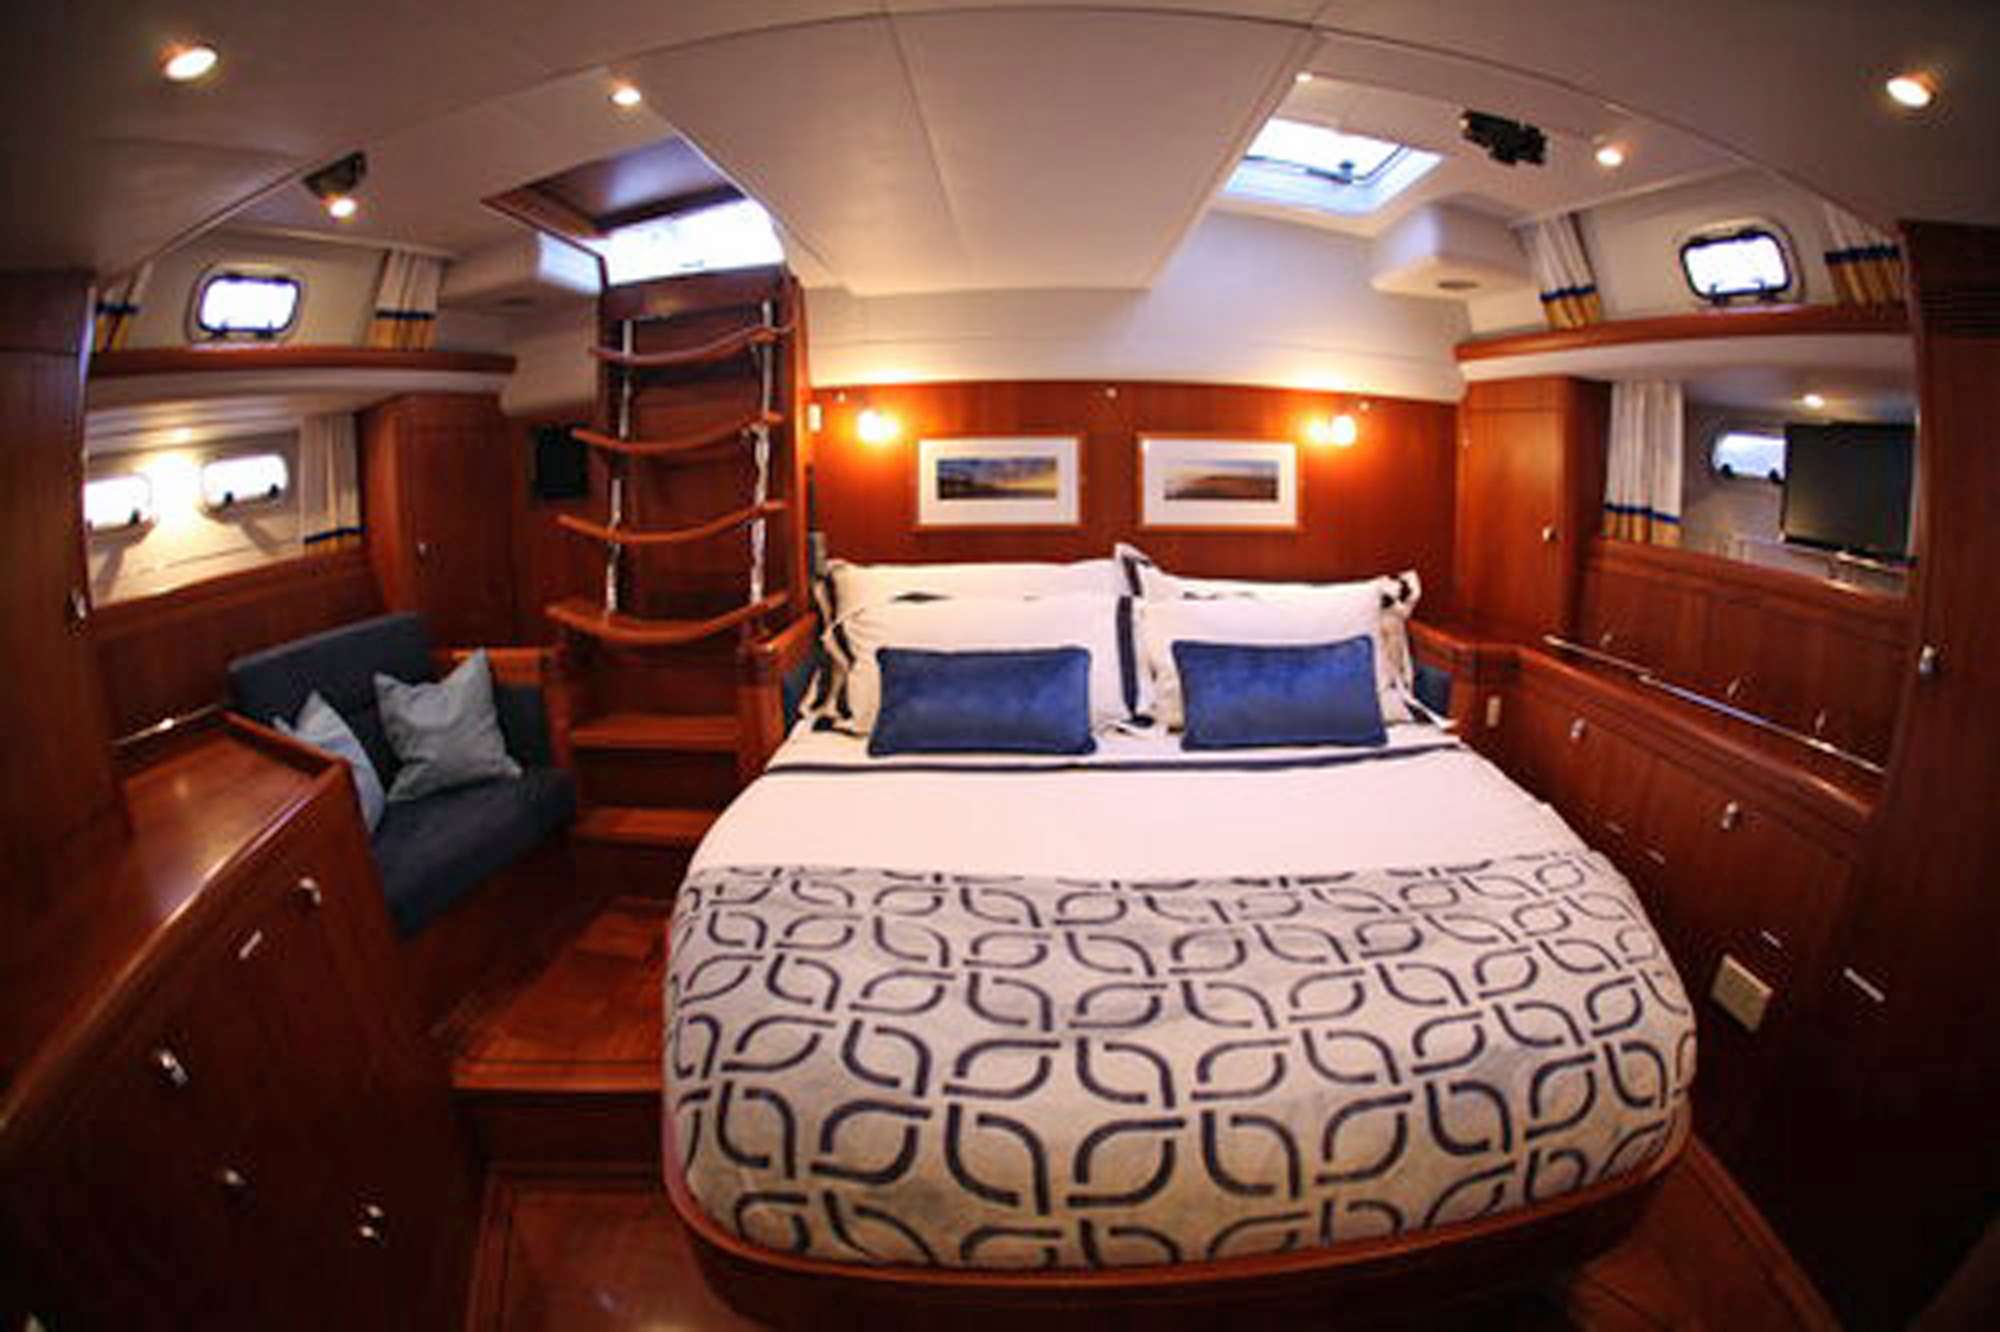 Sailing Yacht 'ELVIS MAGIC' Primary Guest Cabin, 6 PAX, 2 Crew, 66.00 Ft, 20.00 Meters, Built 2003, Oyster Marine, Refit Year 2012 - Main engine - Perkins Sabre 225ti 2016 - Generator - Northern lights 11kw, Bow thruster hydraulic motor and blades 2017 - 